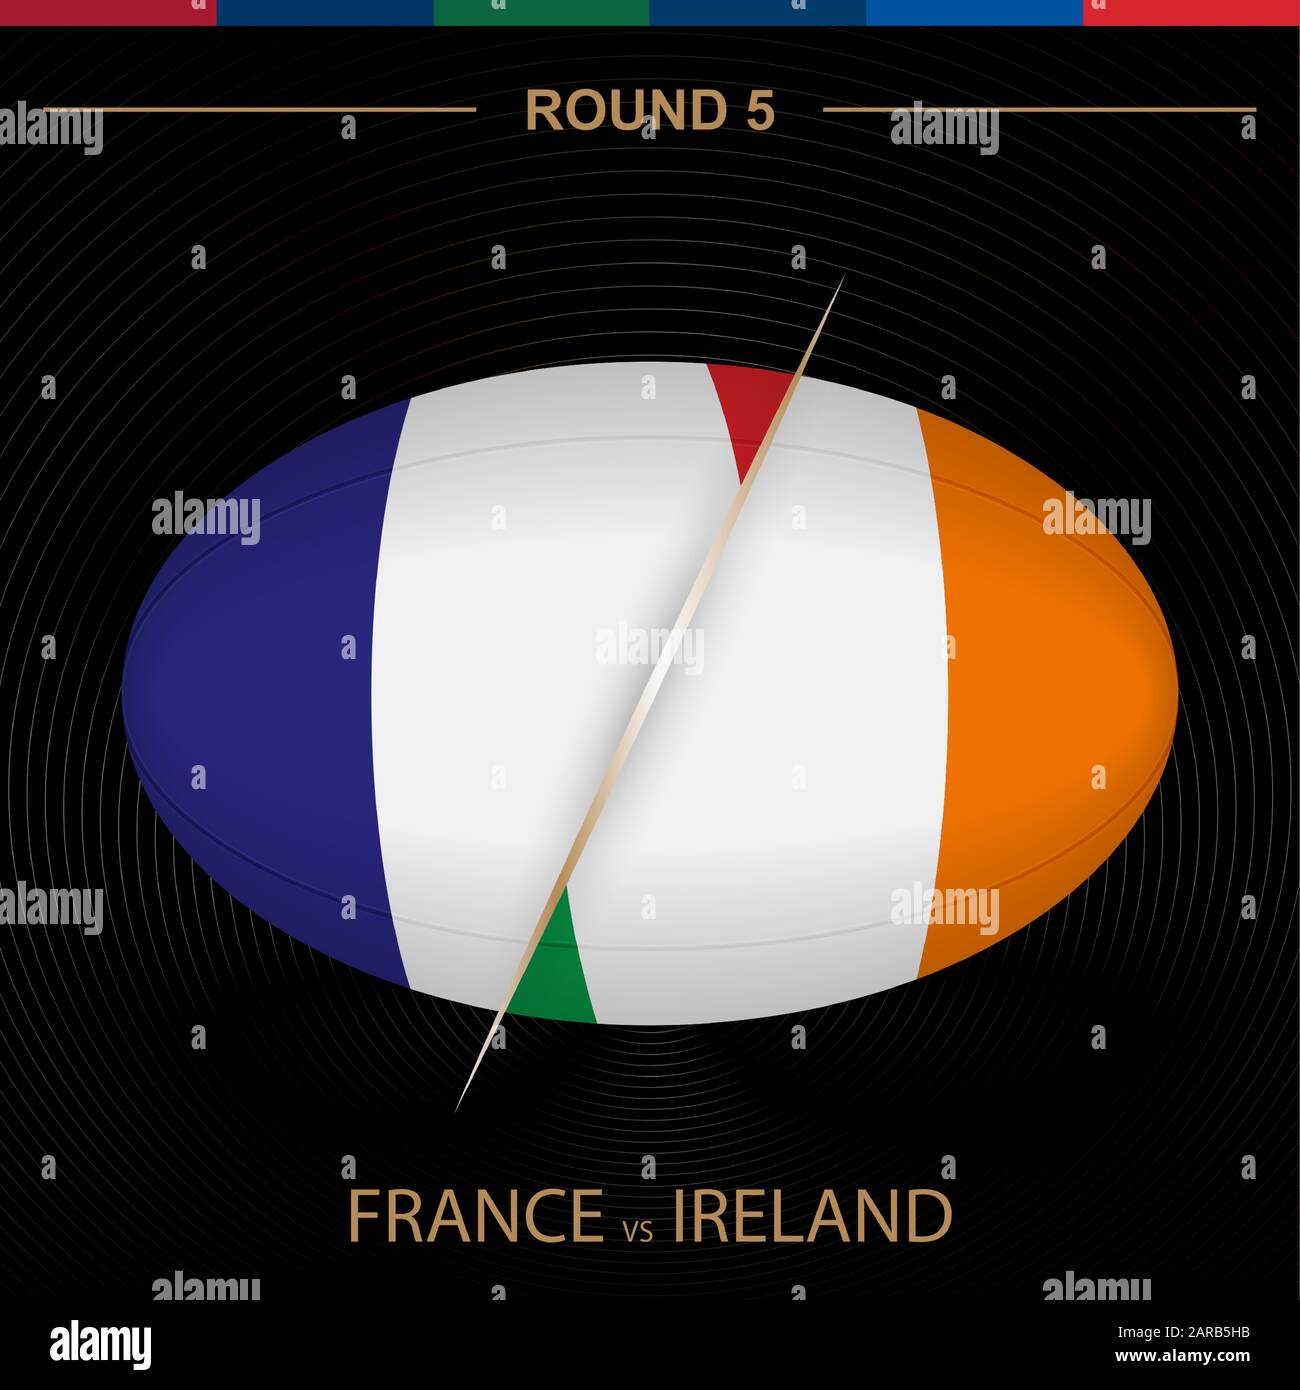 France vs Ireland in Rugby Tournament round 5, ball shaped rugby icon on black background. Vector template. Stock Vector